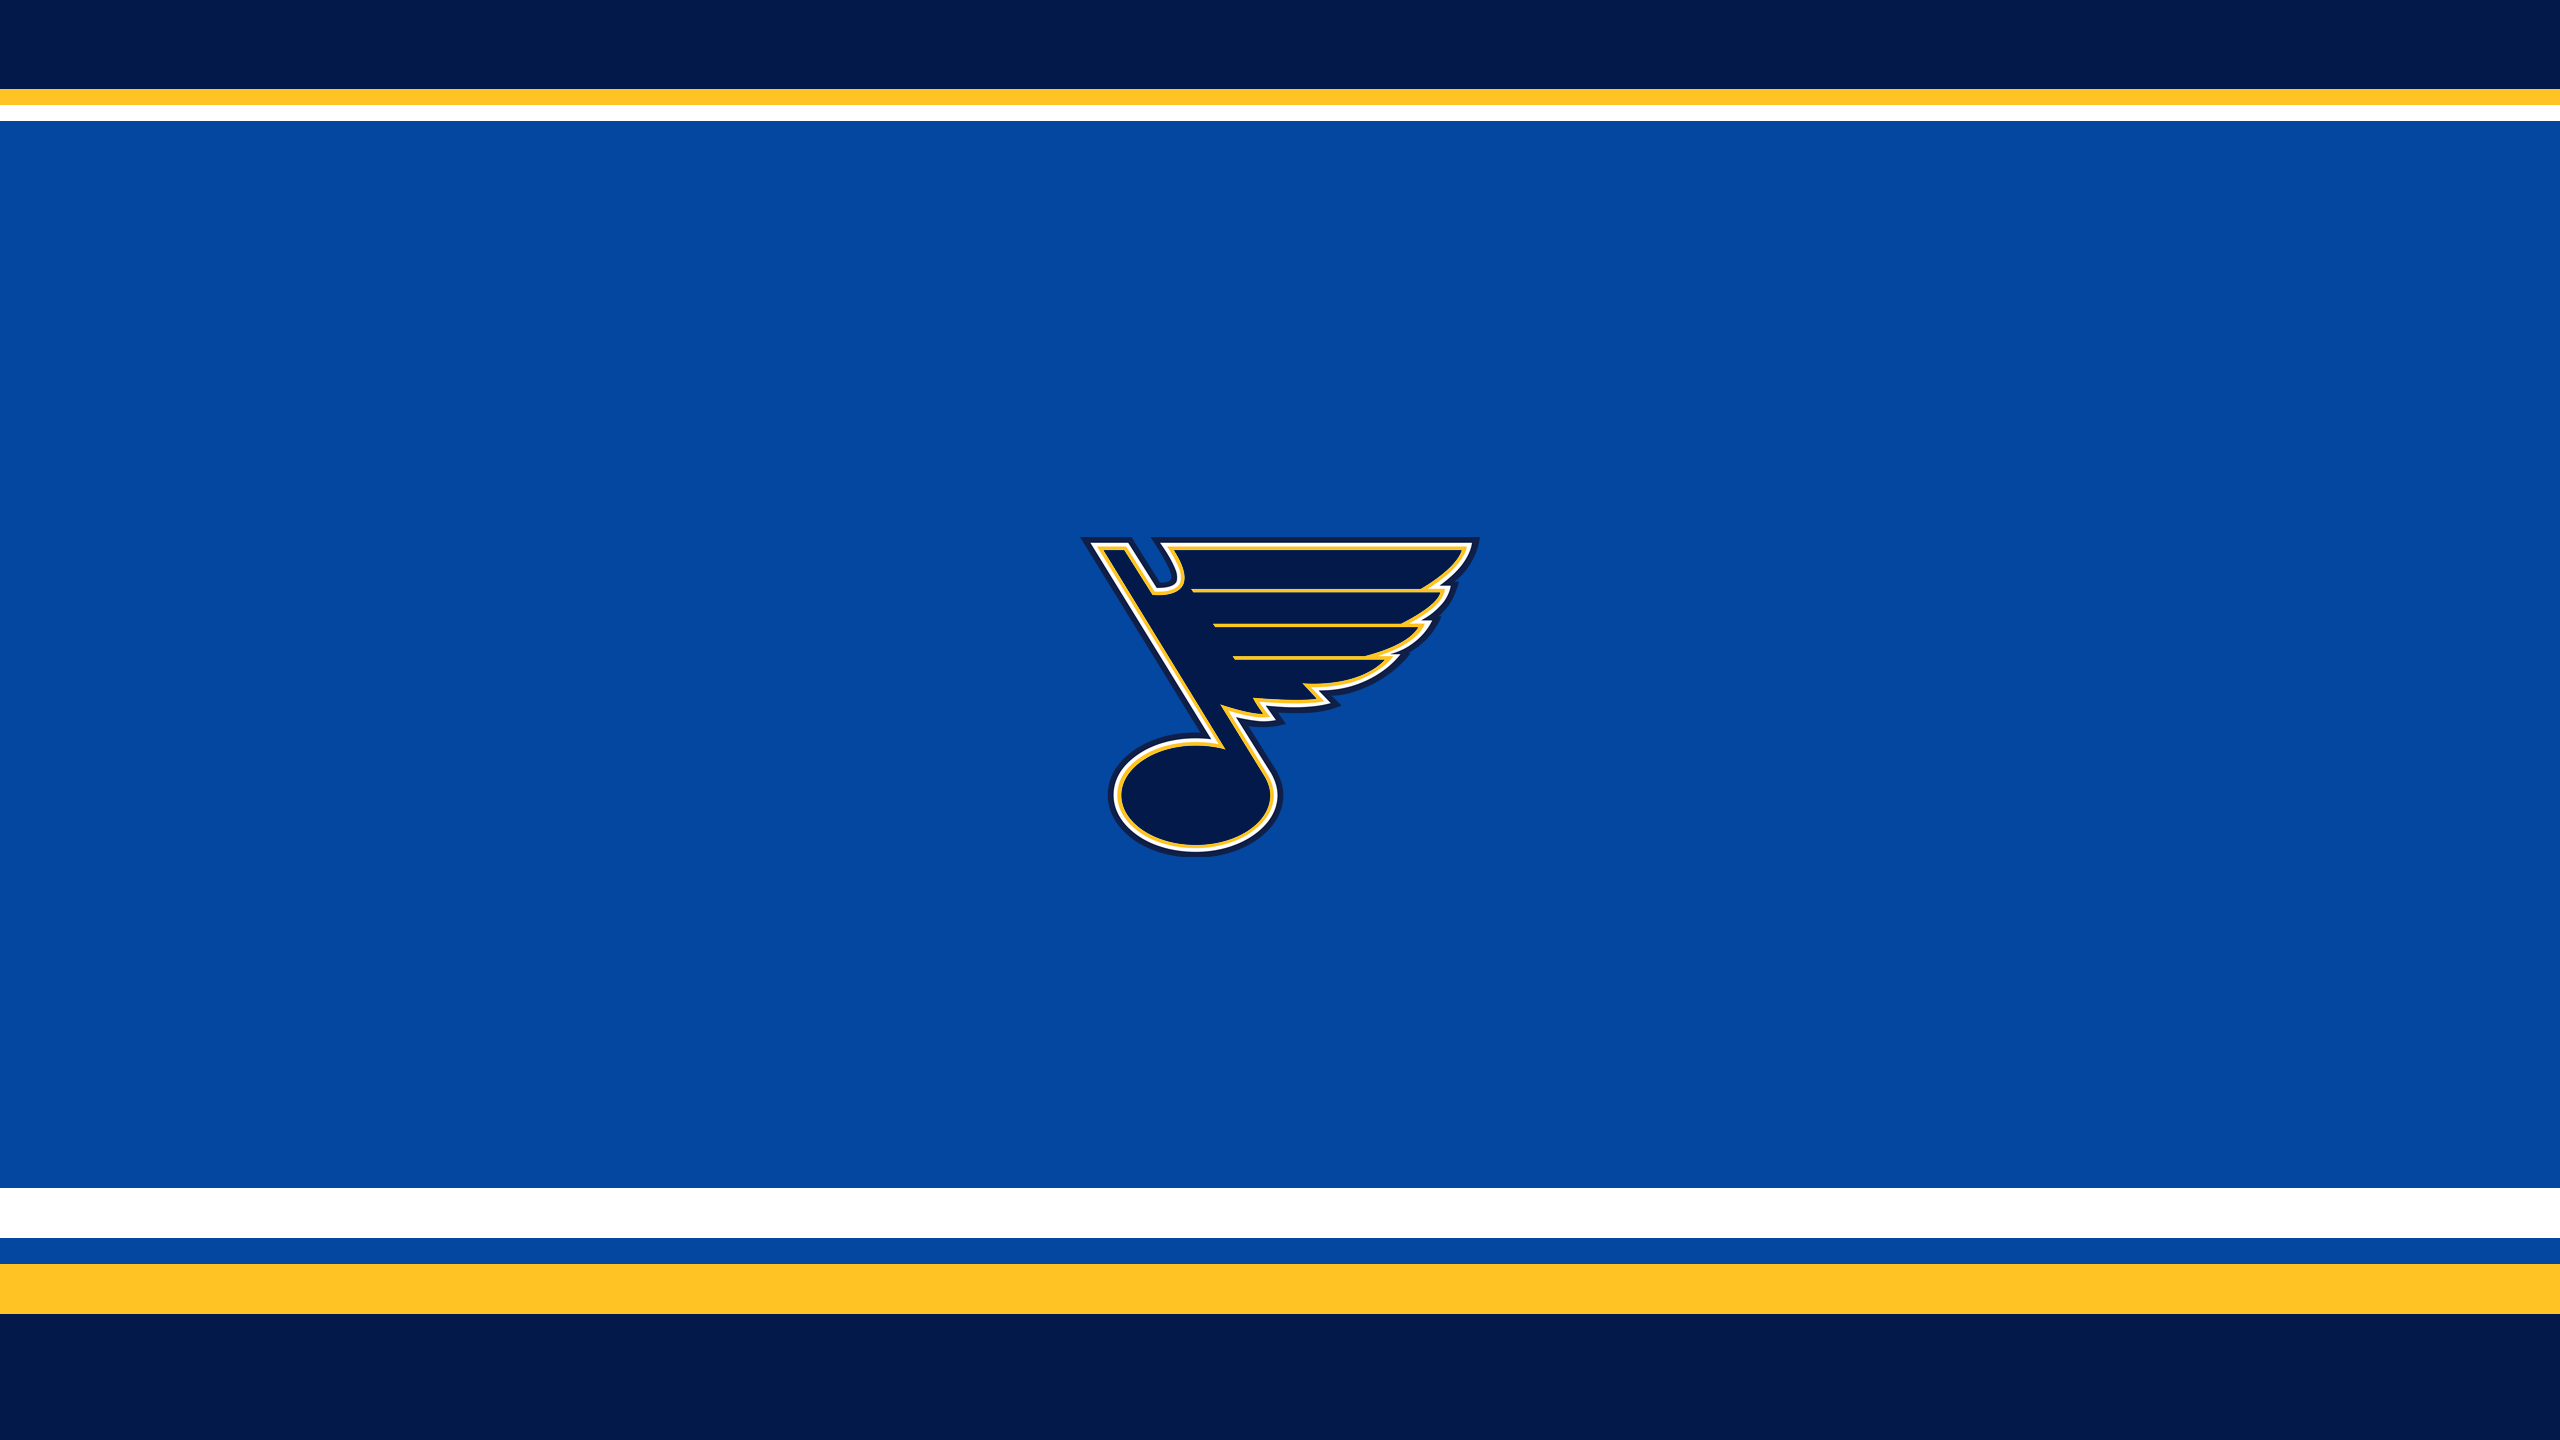 St Louis Blues - NHL - Square Bettor